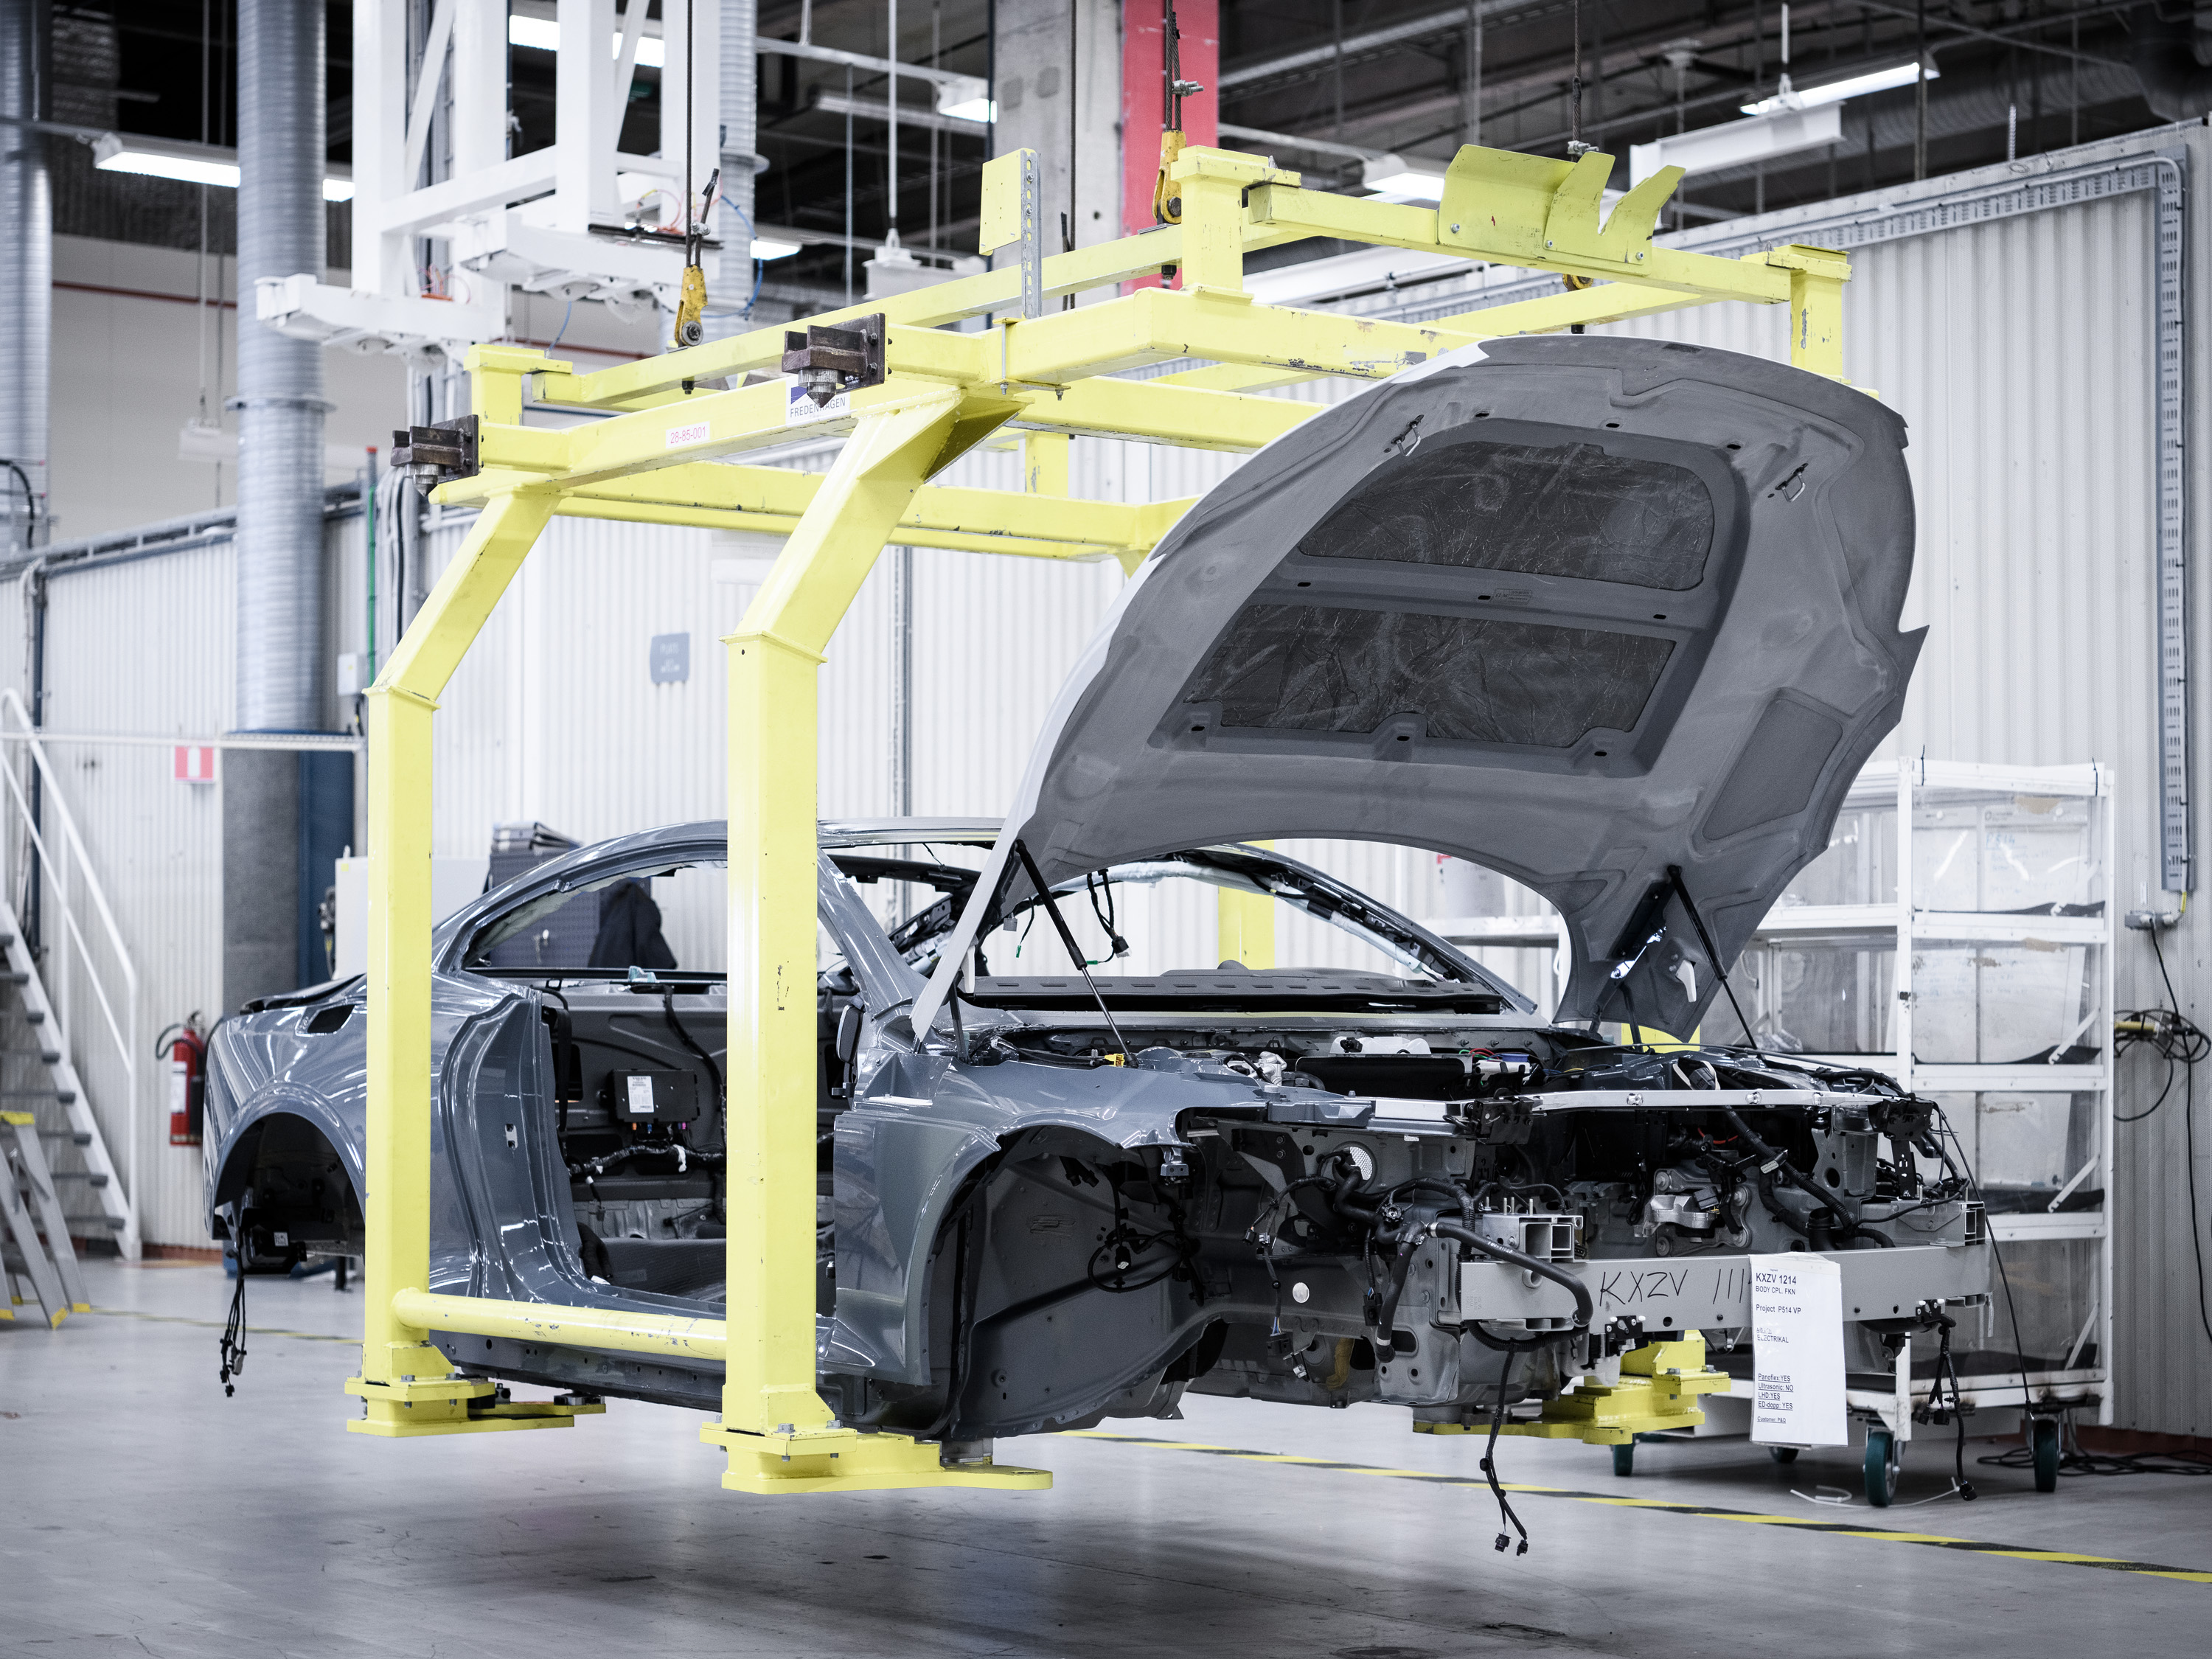 Volvo’s Polestar brand is assembling prototypes of its first plug-in hybrid sports car